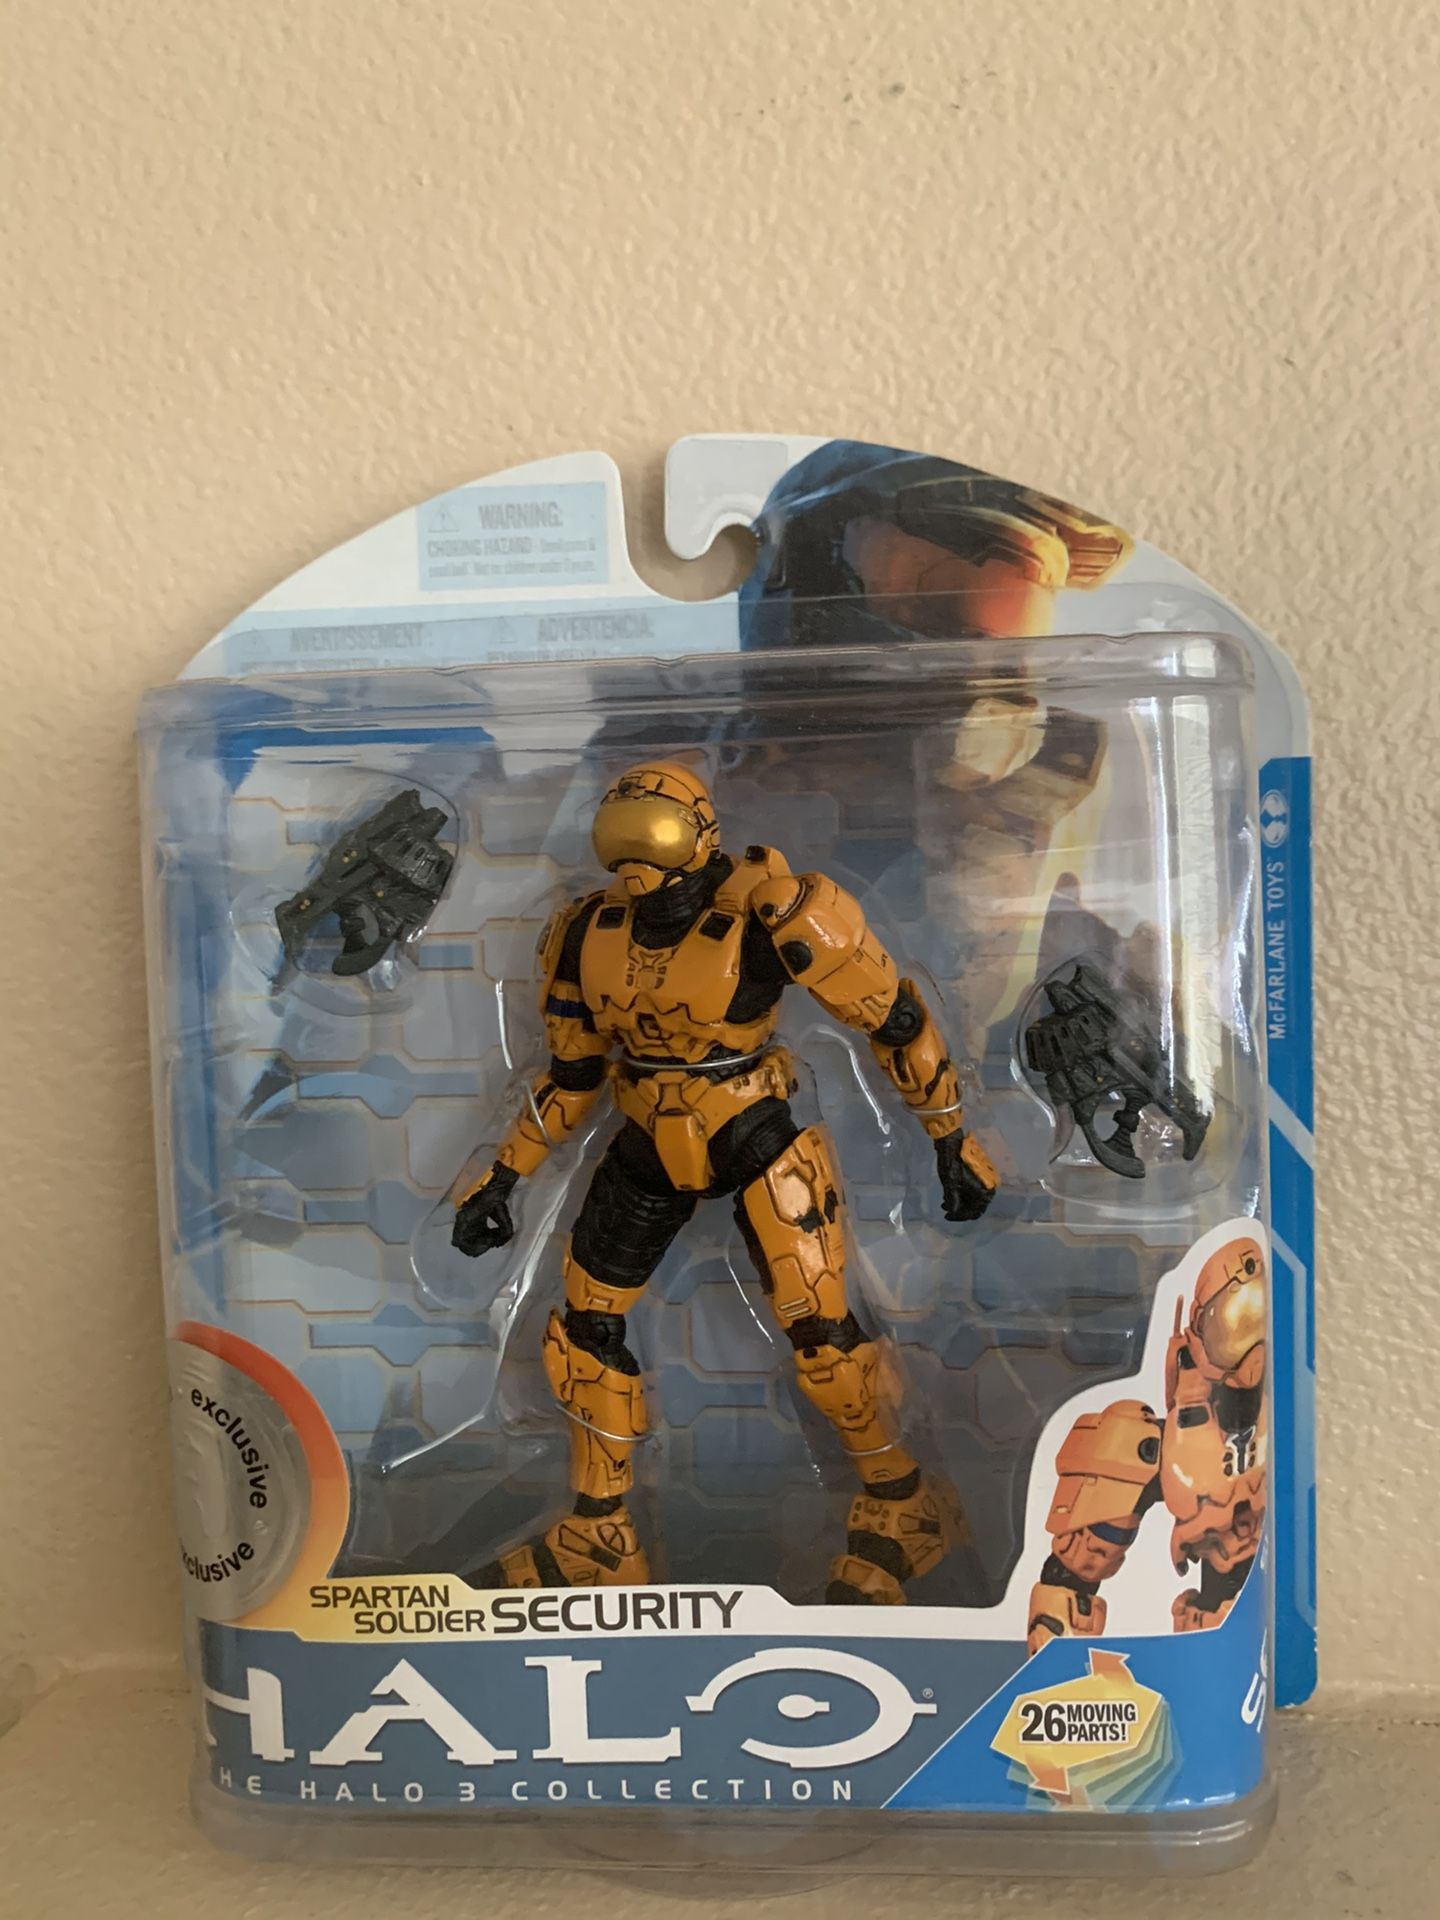 Mcfarlane Toys Halo 3 Collection Spartan Soldier Security